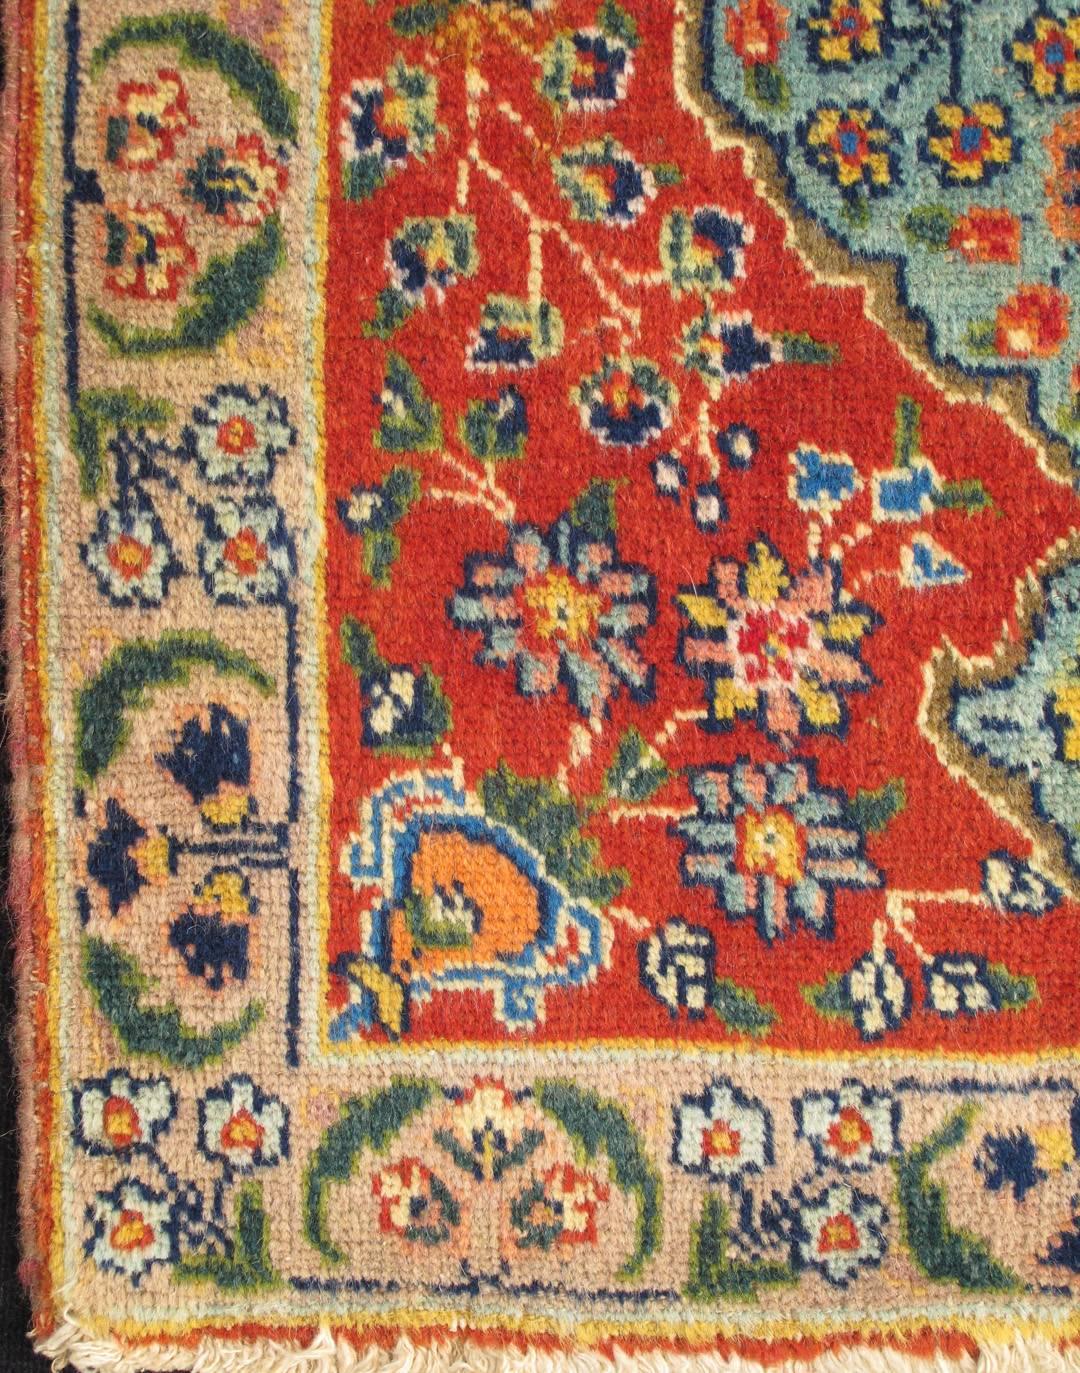 This spectacular Persian Tabriz bears magnificent splendor indicative of royal tastes, which sought perfection in balance and palette. The circular, script-style medallion displays various floral motifs and is complemented by two stretched palmettes